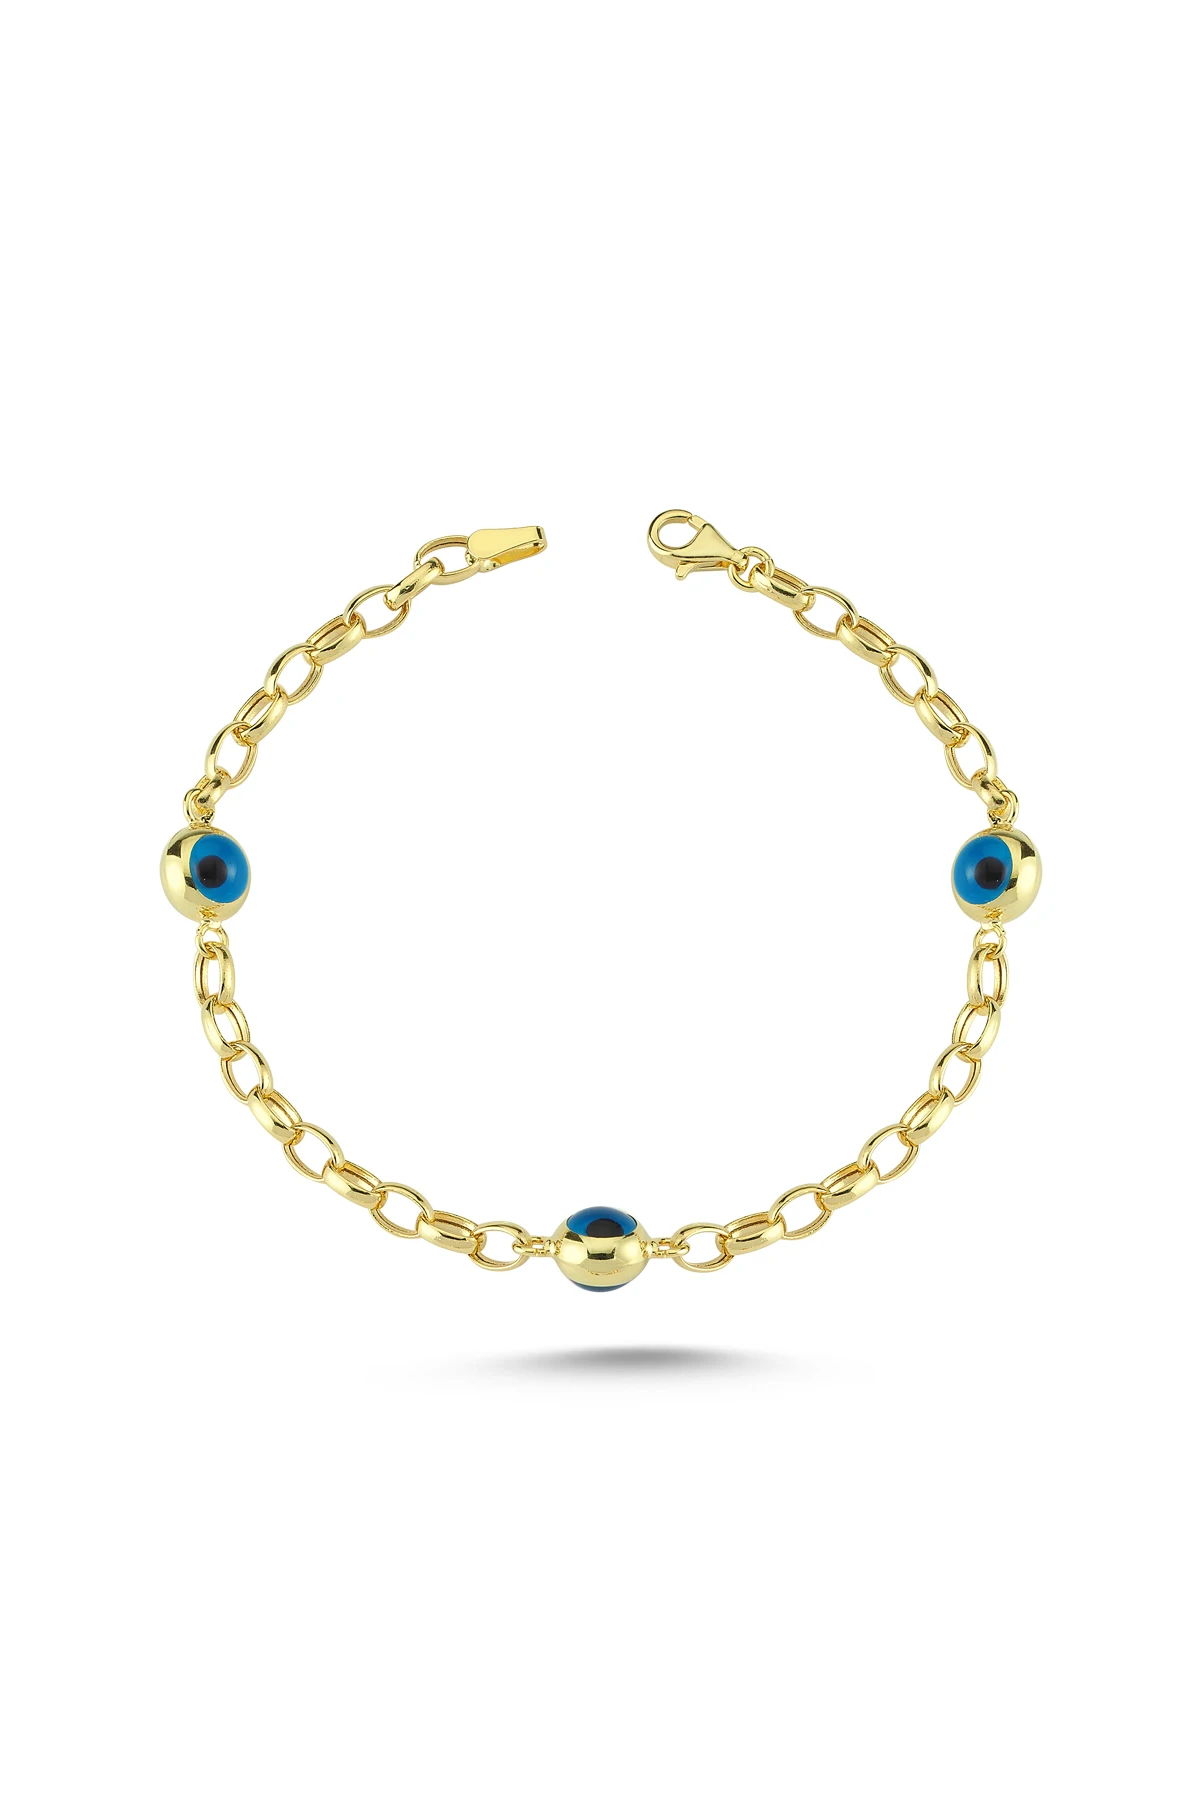 

Triple Evil Eye Beaded Gold Bracelet TTGBLANZ108 - Certified 14K Gold–A perfect gift for your Loved Ones